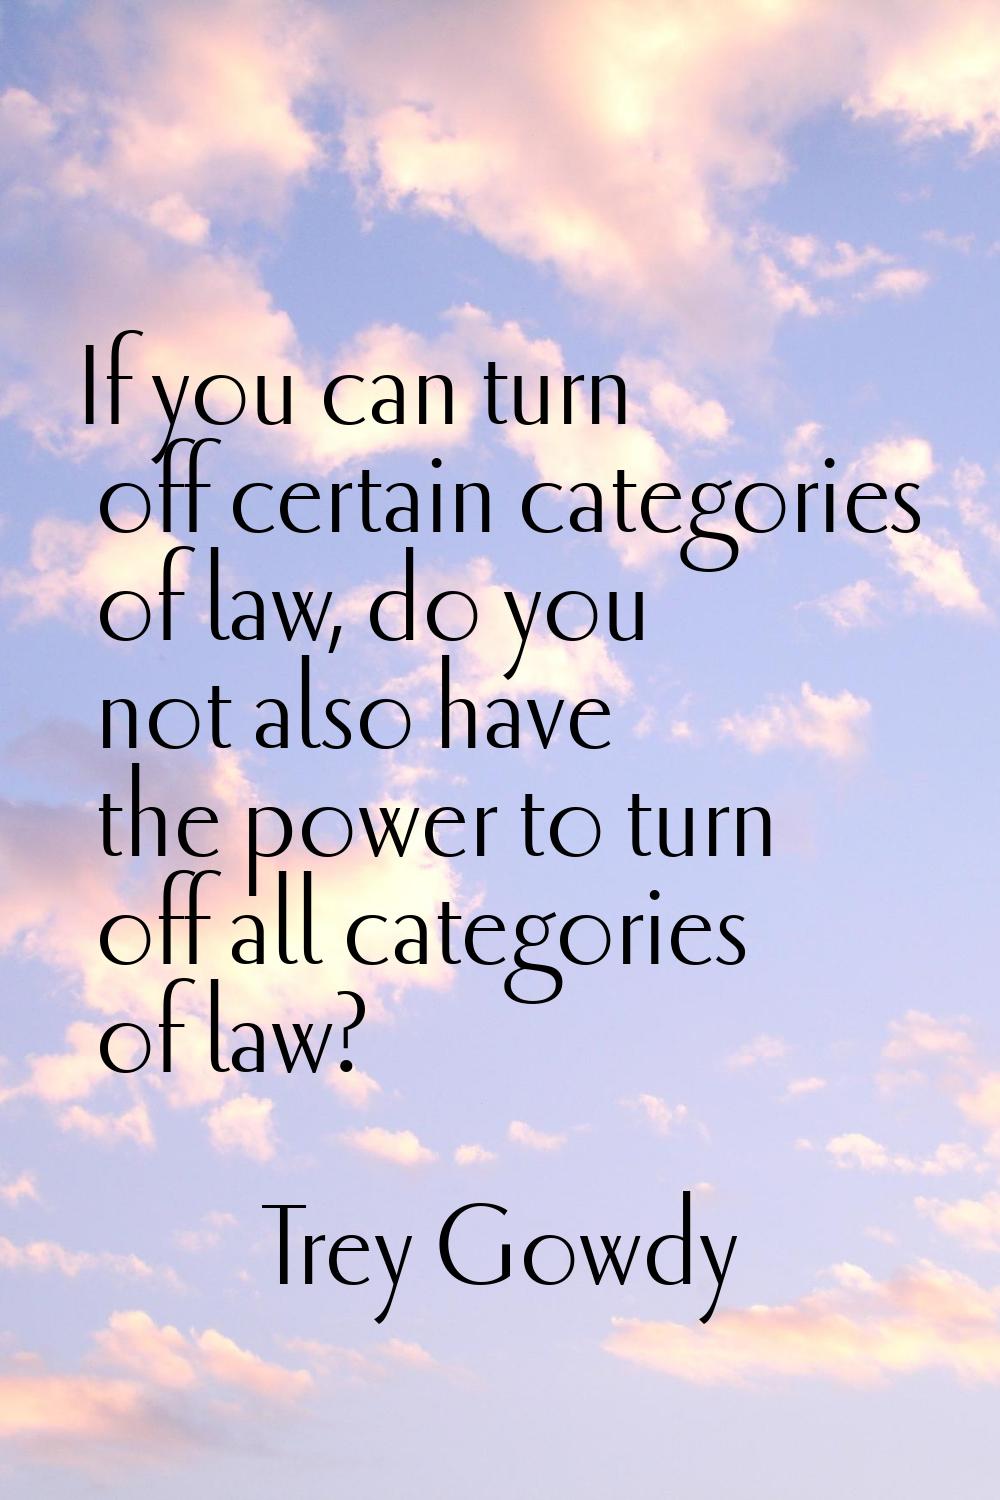 If you can turn off certain categories of law, do you not also have the power to turn off all categ